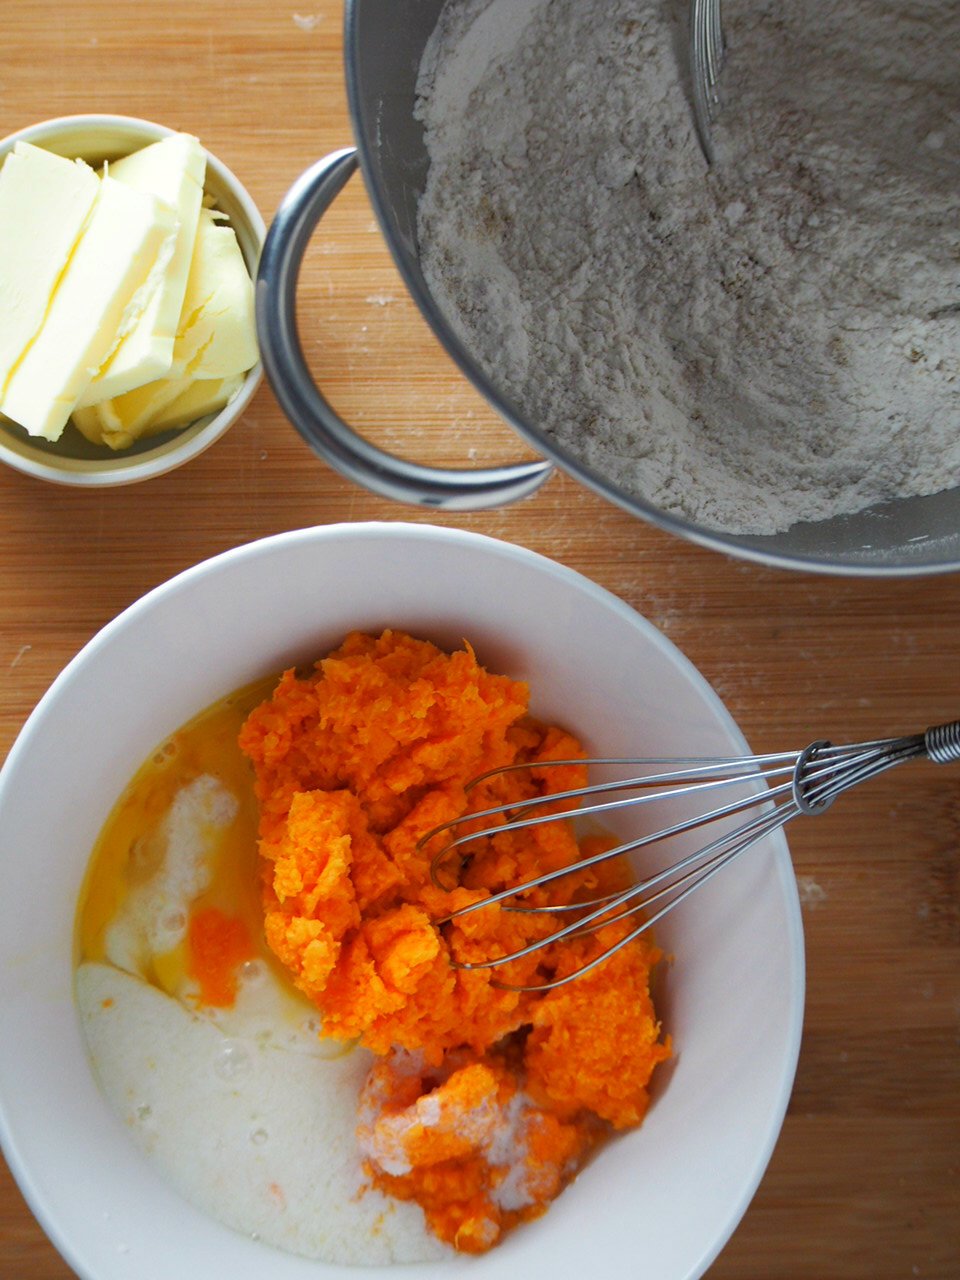 Ingredients of sweet potato scones are ready to be mixed into a dough : mashed sweet potato and buttermilk, flour mixture and butter.